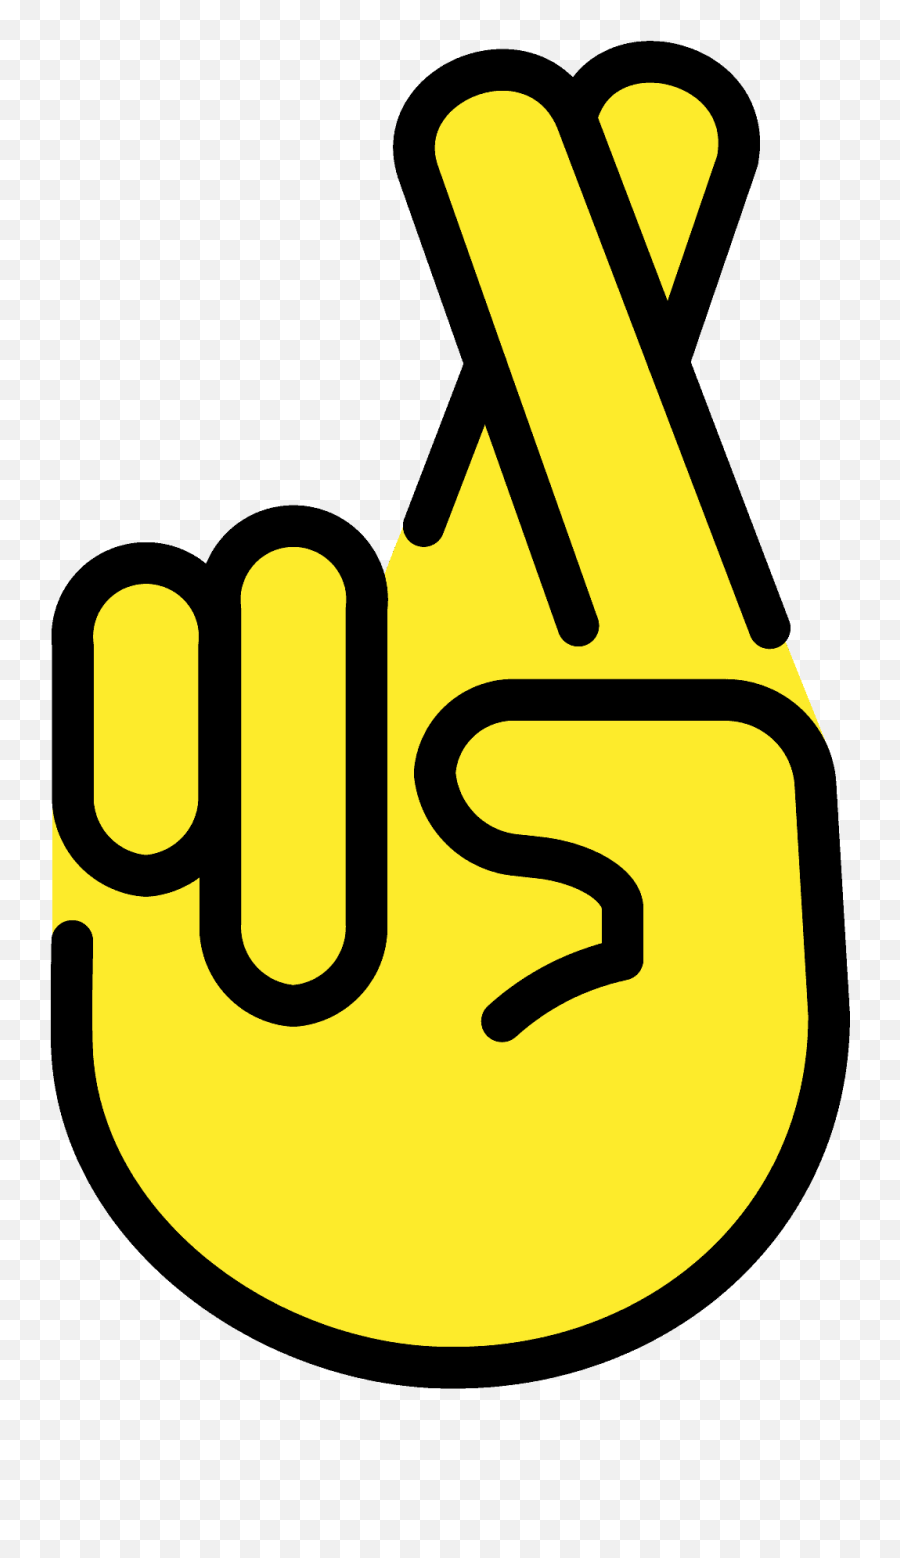 Hand With Index And Middle Fingers Emoji,Fingers Crossed Emoji